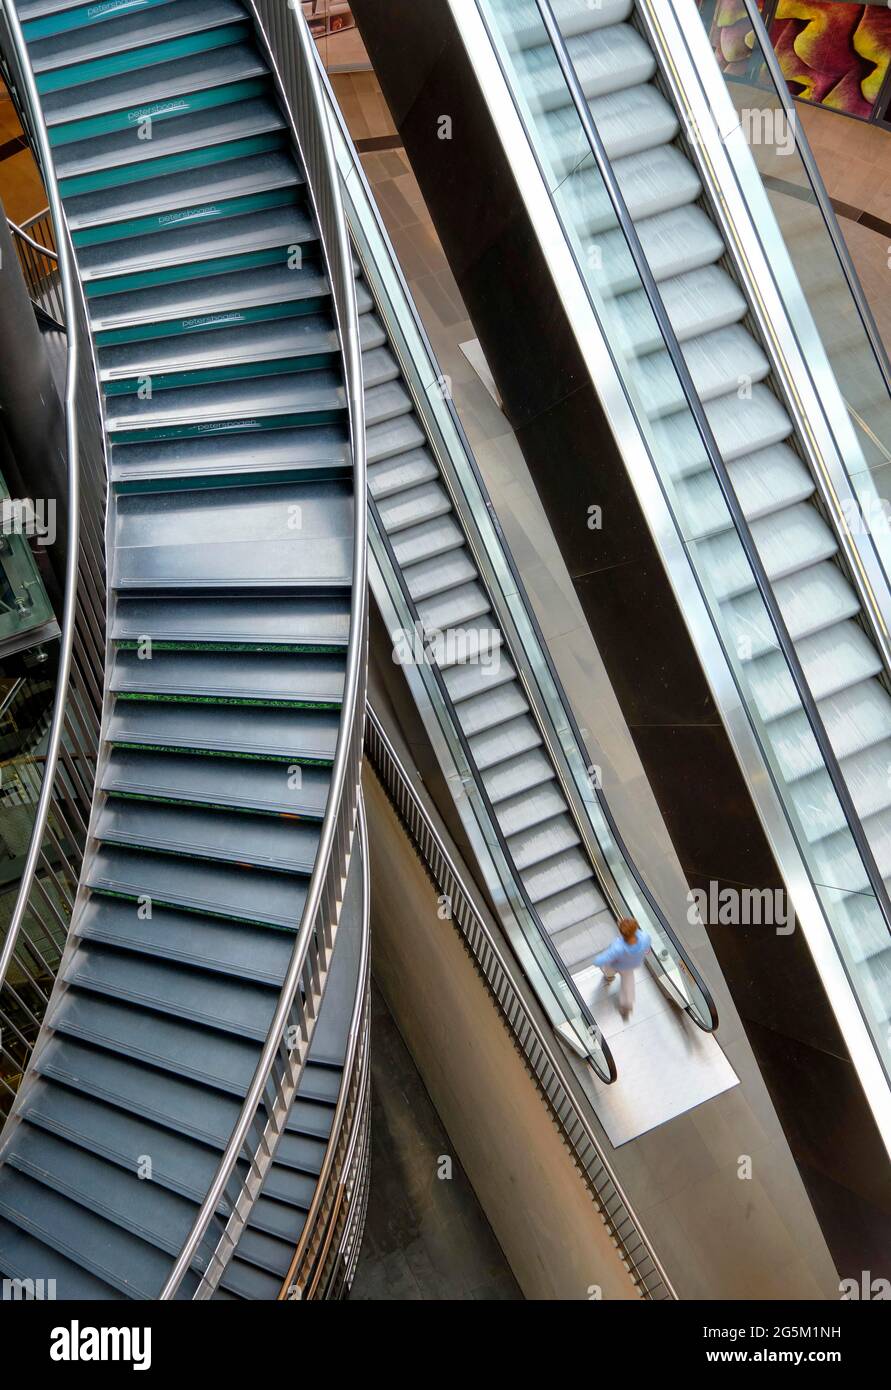 Escalators and the Louis Vuitton Store in Towson Town Center, Ma Editorial  Stock Photo - Image of corporate, entrance: 47796193